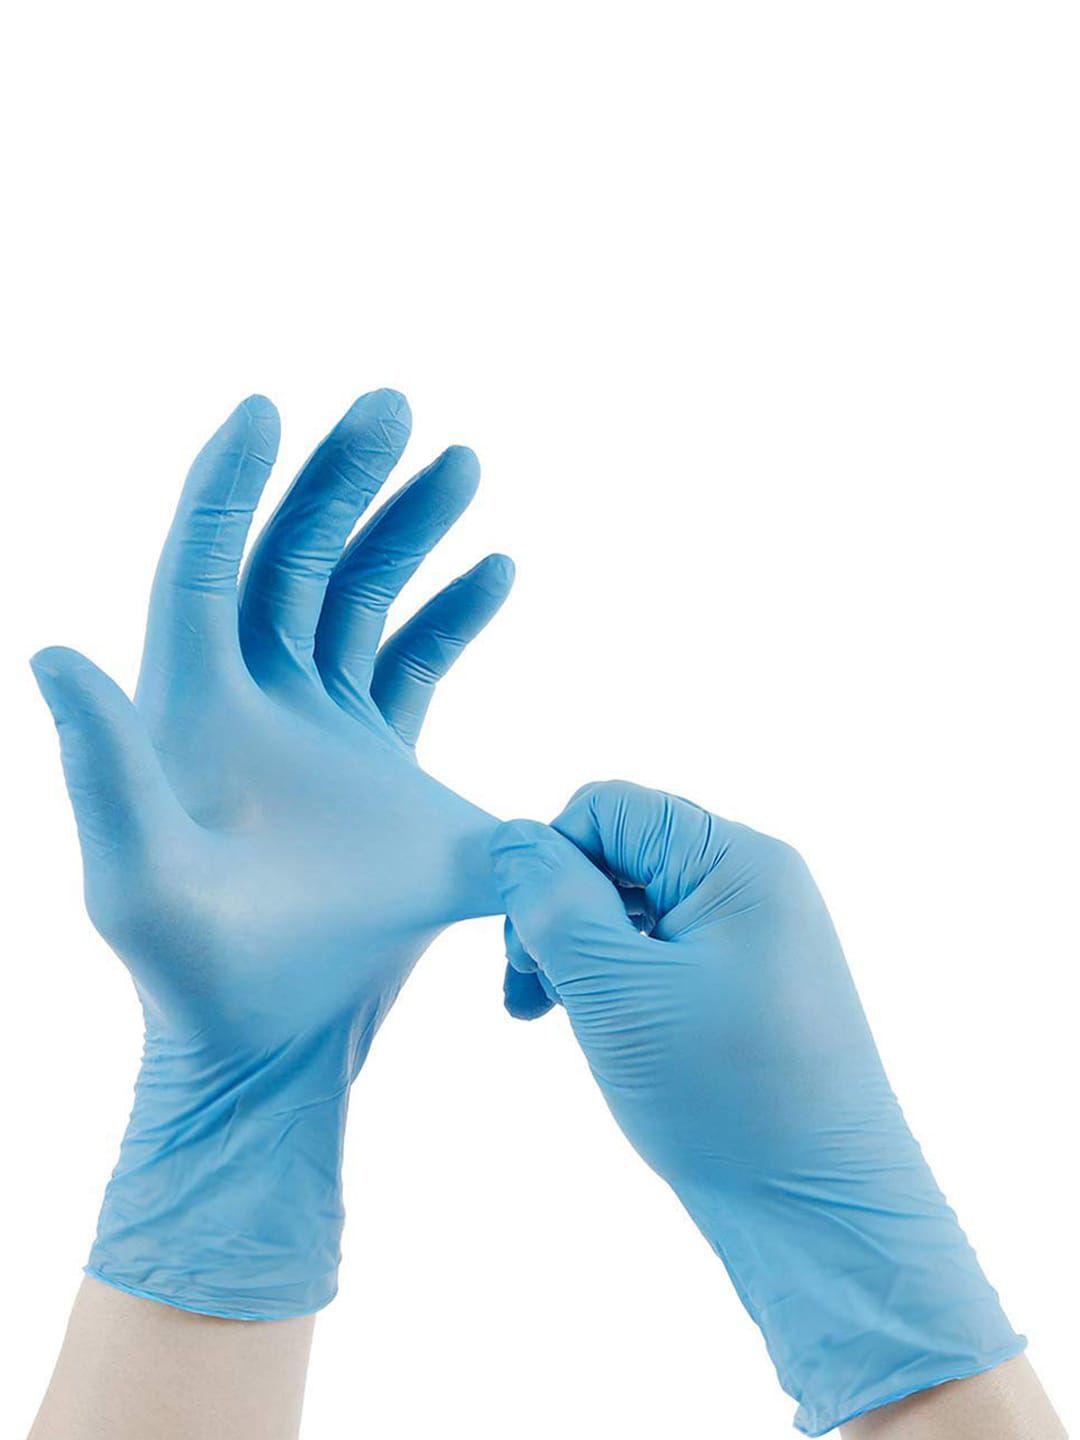 london fashion hob pack of 20 disposable hand gloves